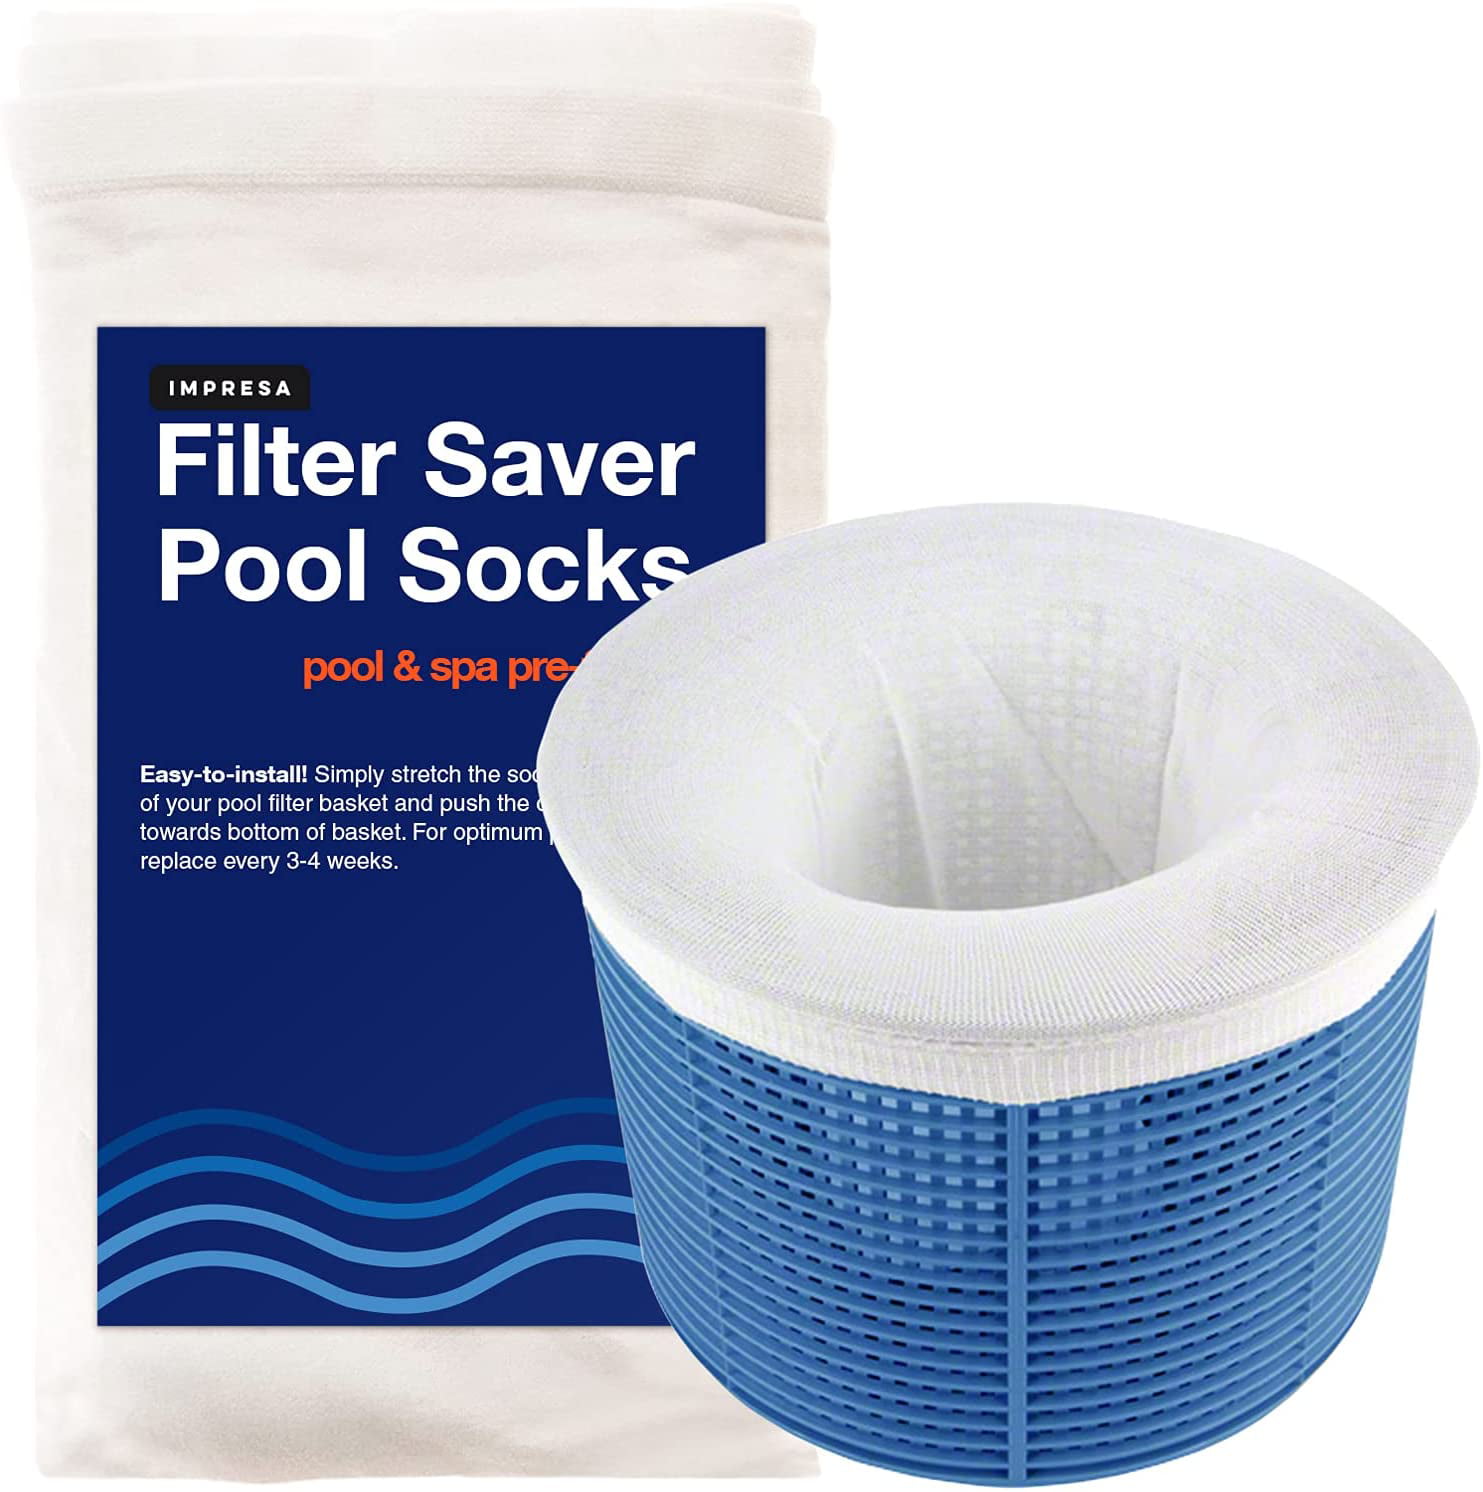 Baskets,&Skimmers Removes Debris Leaves Oil Scum & More! Kyerivs Pool Skimmer Socks- Pack of 10 Fine Nylon Mesh Screen Sock Perfect Filter Savers to Protect Your Filters Pollen Bugs 